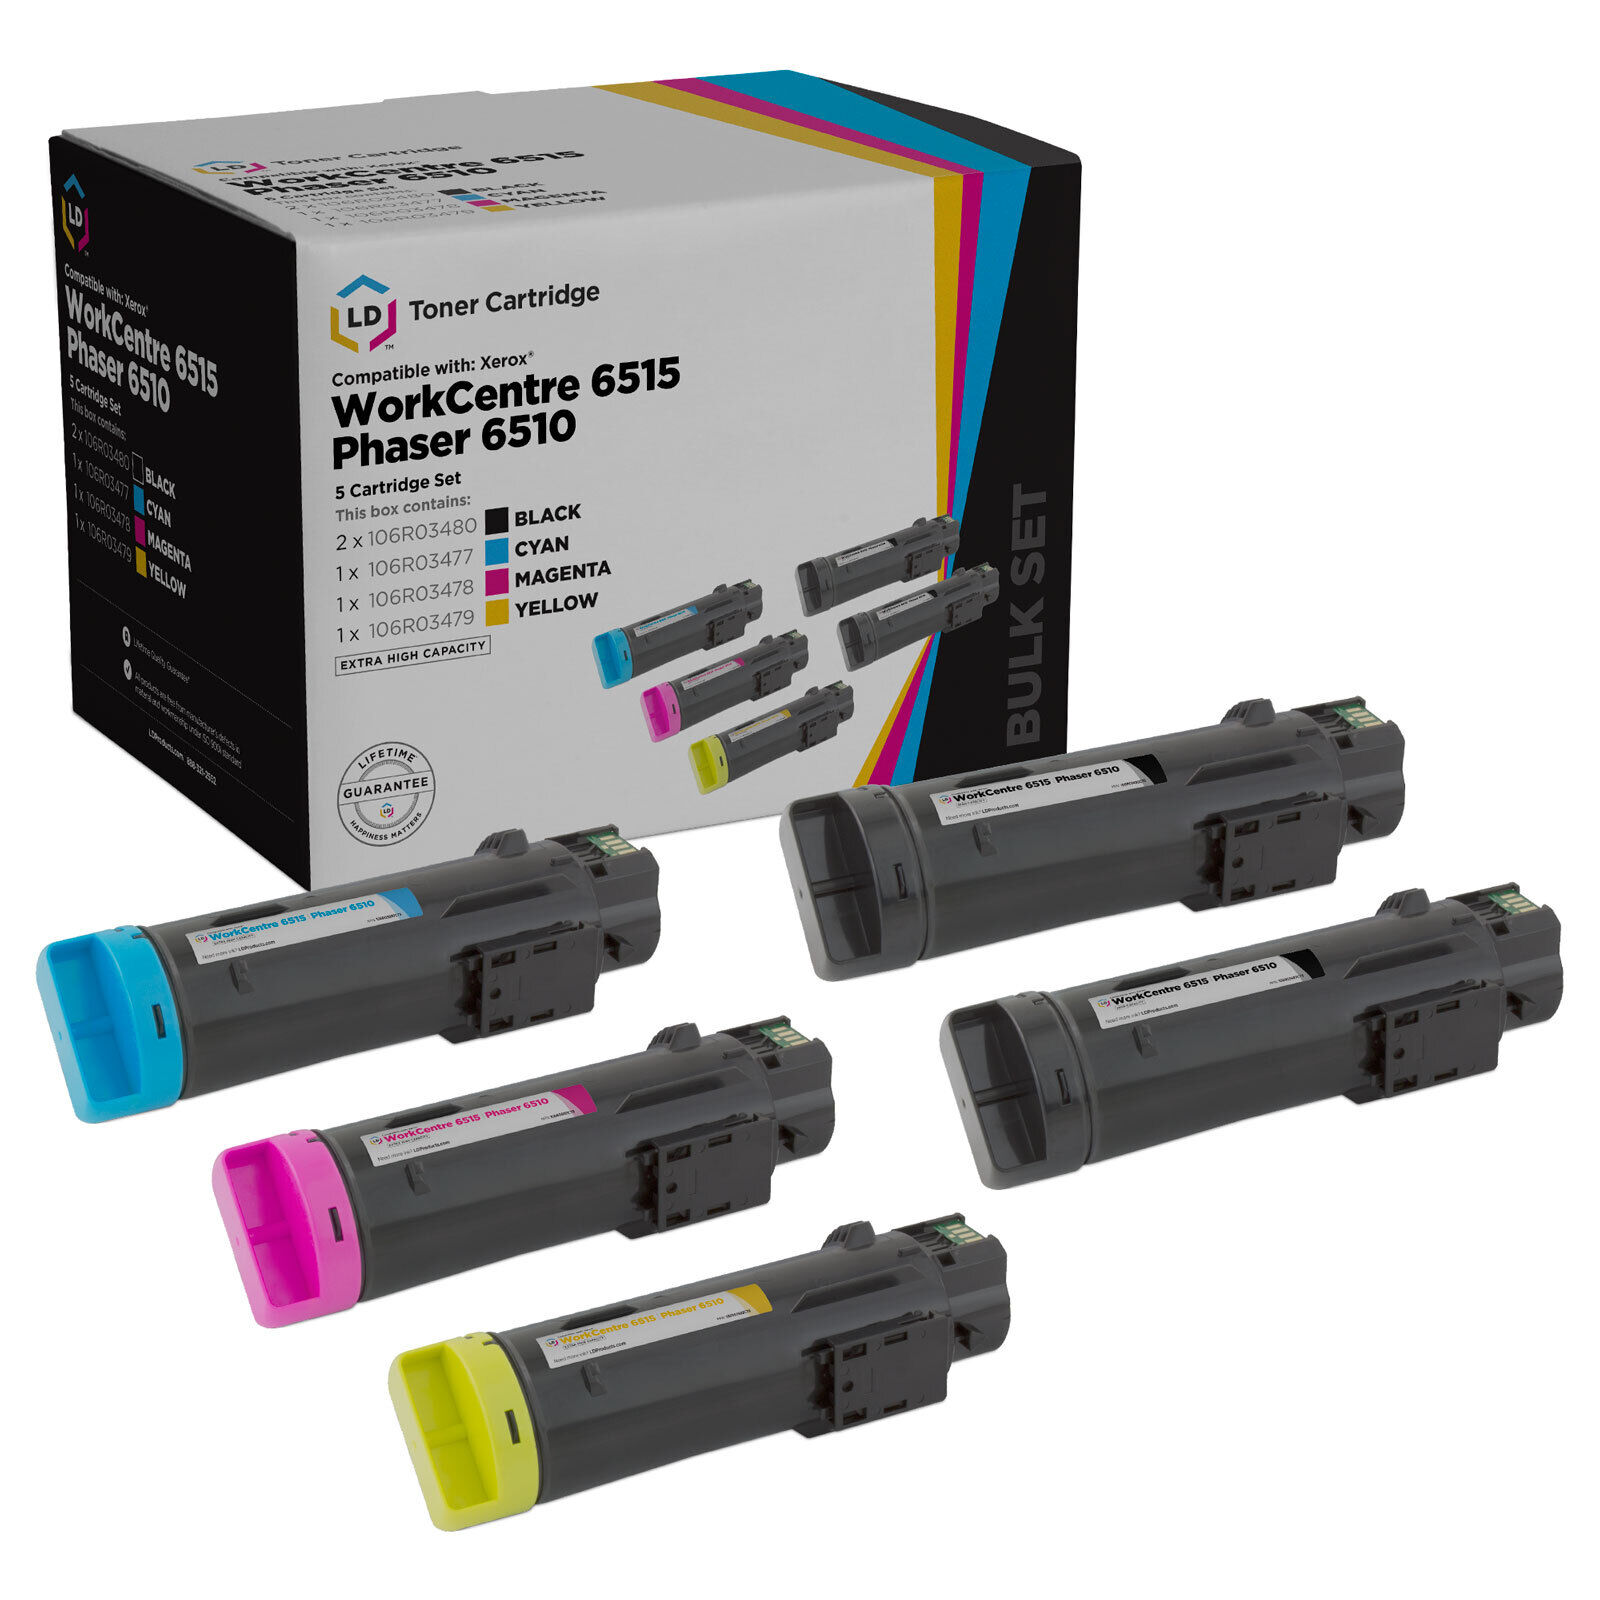 LD Compatible Xerox Phaser 6510 / WorkCentre 6515 HY Toner Cartridges 5PK